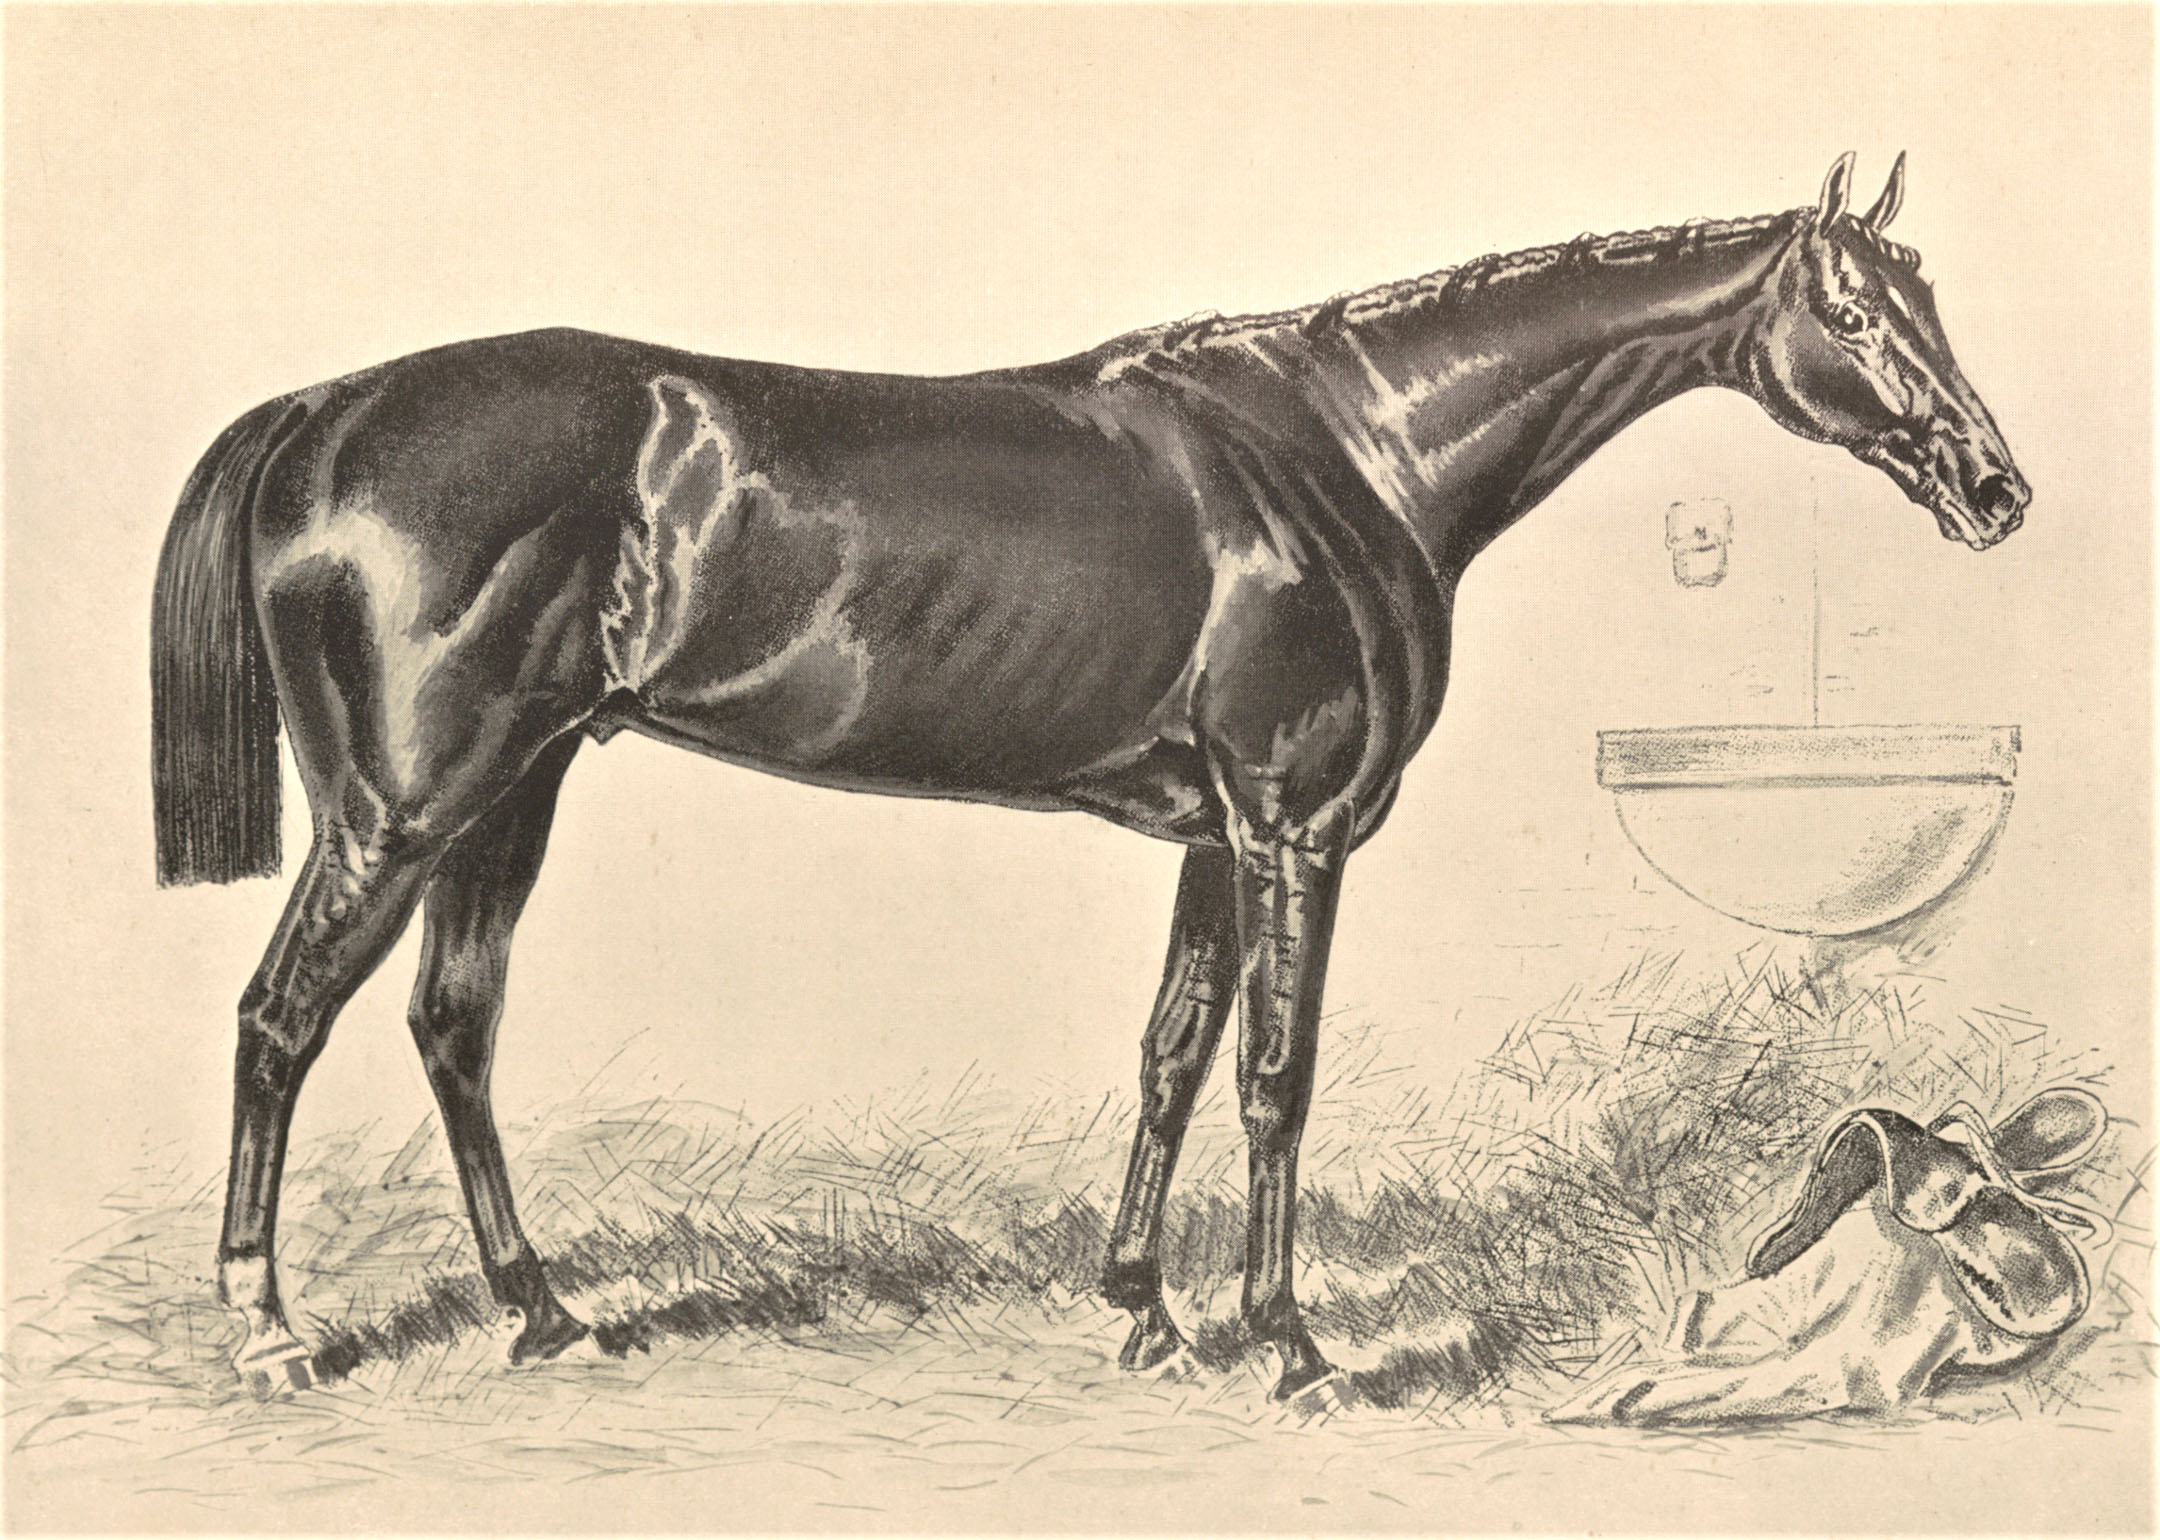 Illustration of Hindoo from Vosburgh's "Racing in America" (Keeneland Library Collection)